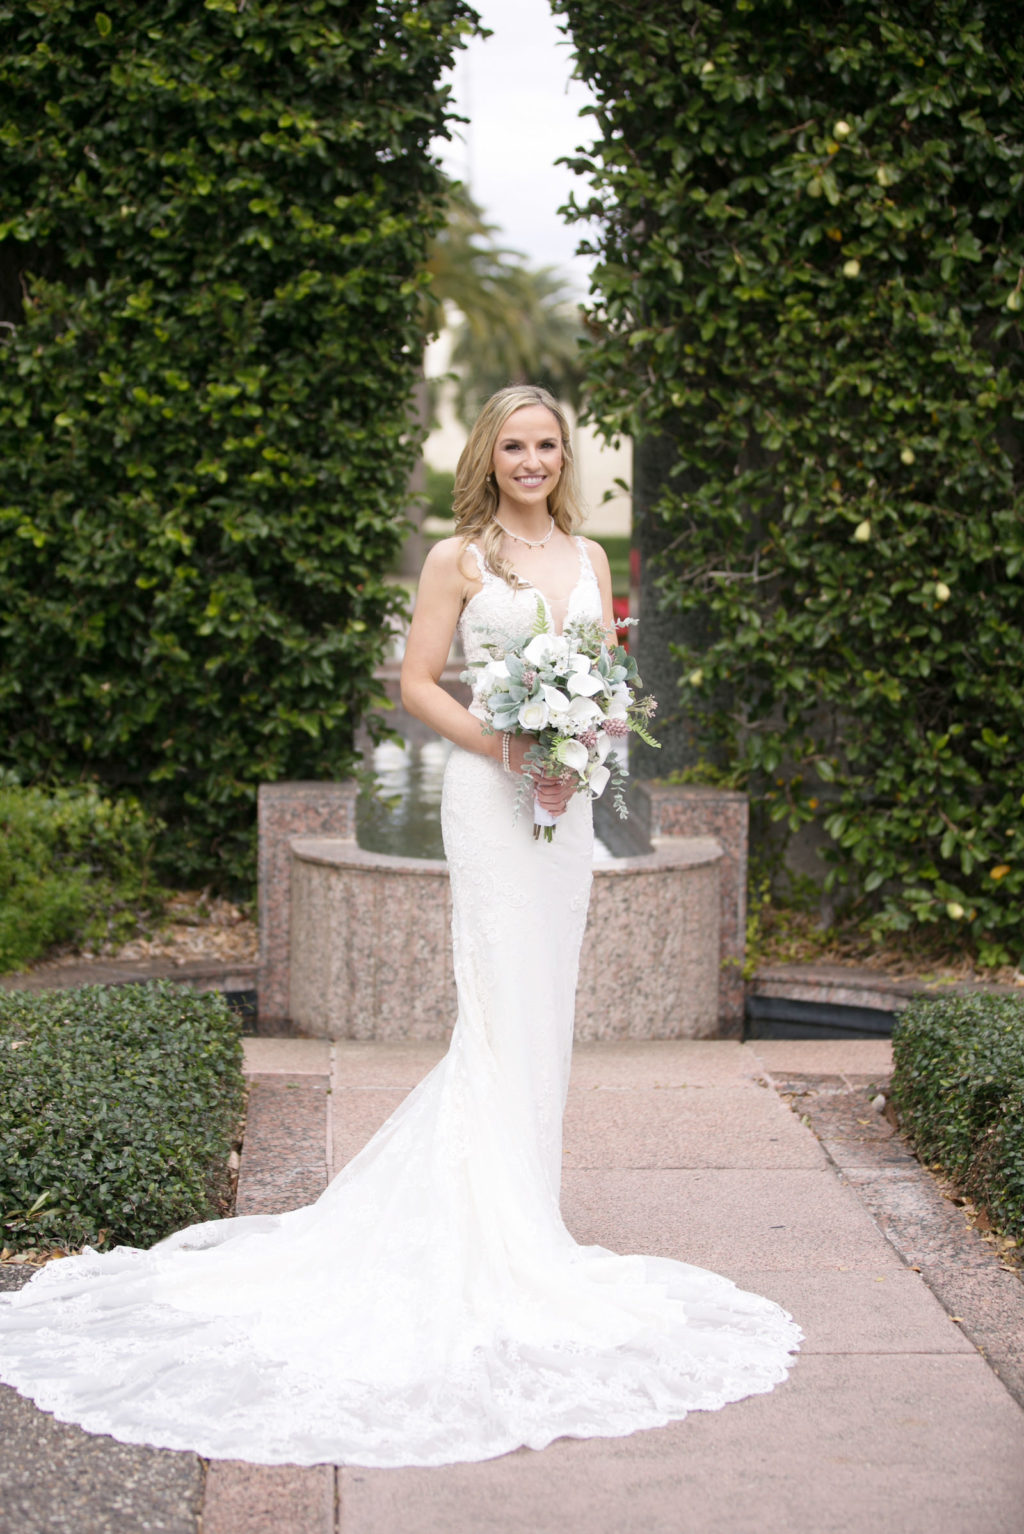 Beautiful Blushing Bride in Sweetheart Neckline and Long Train | Tampa Bay Wedding Photographer Carrie Wildes Photography